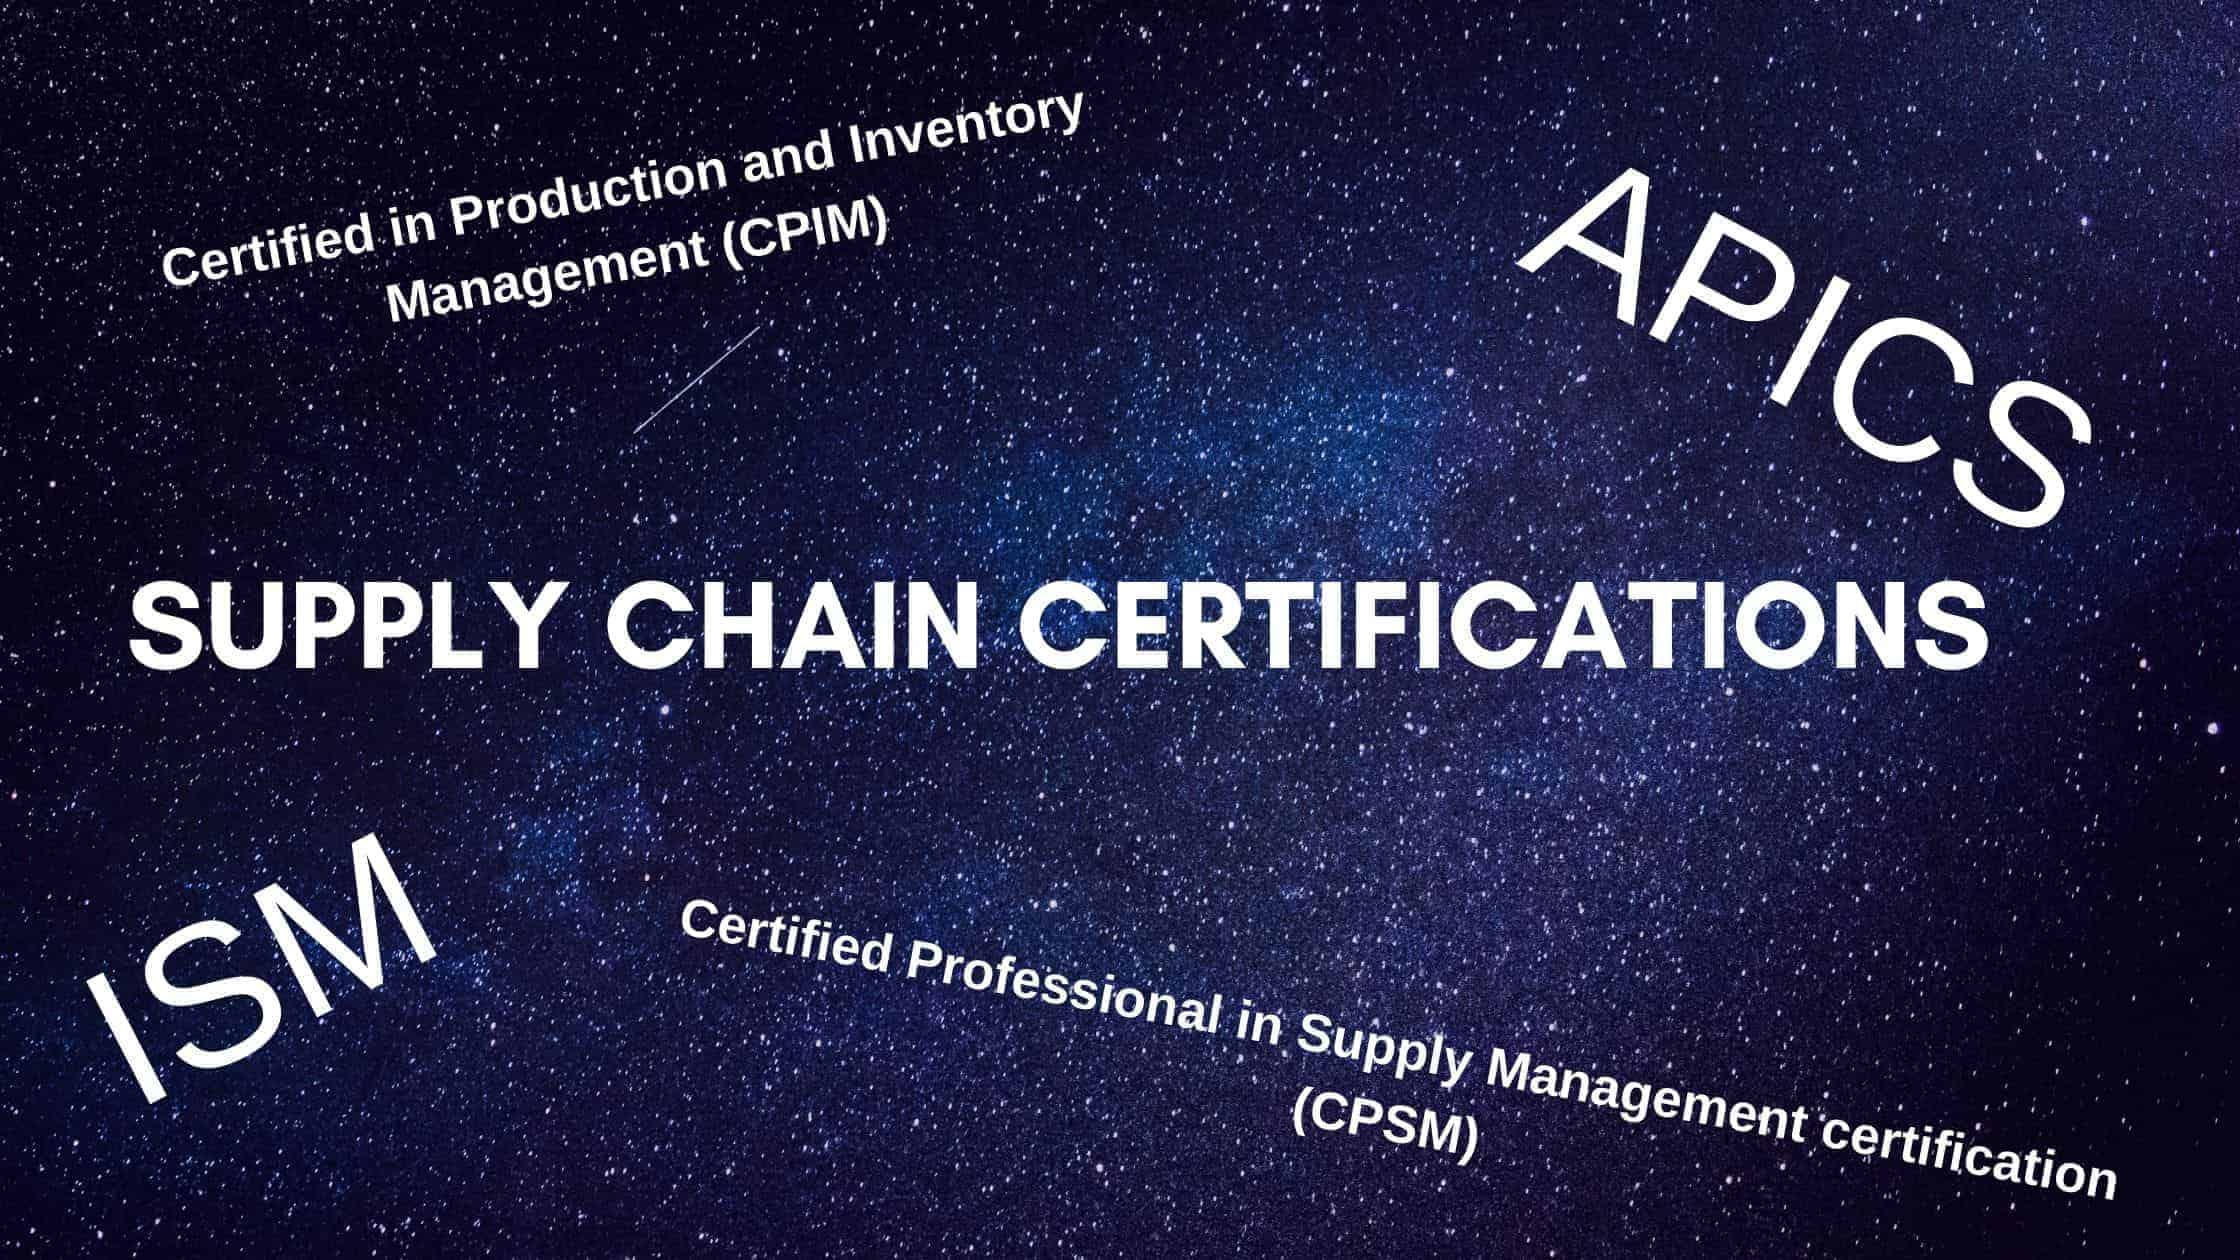 Supply chain certifications